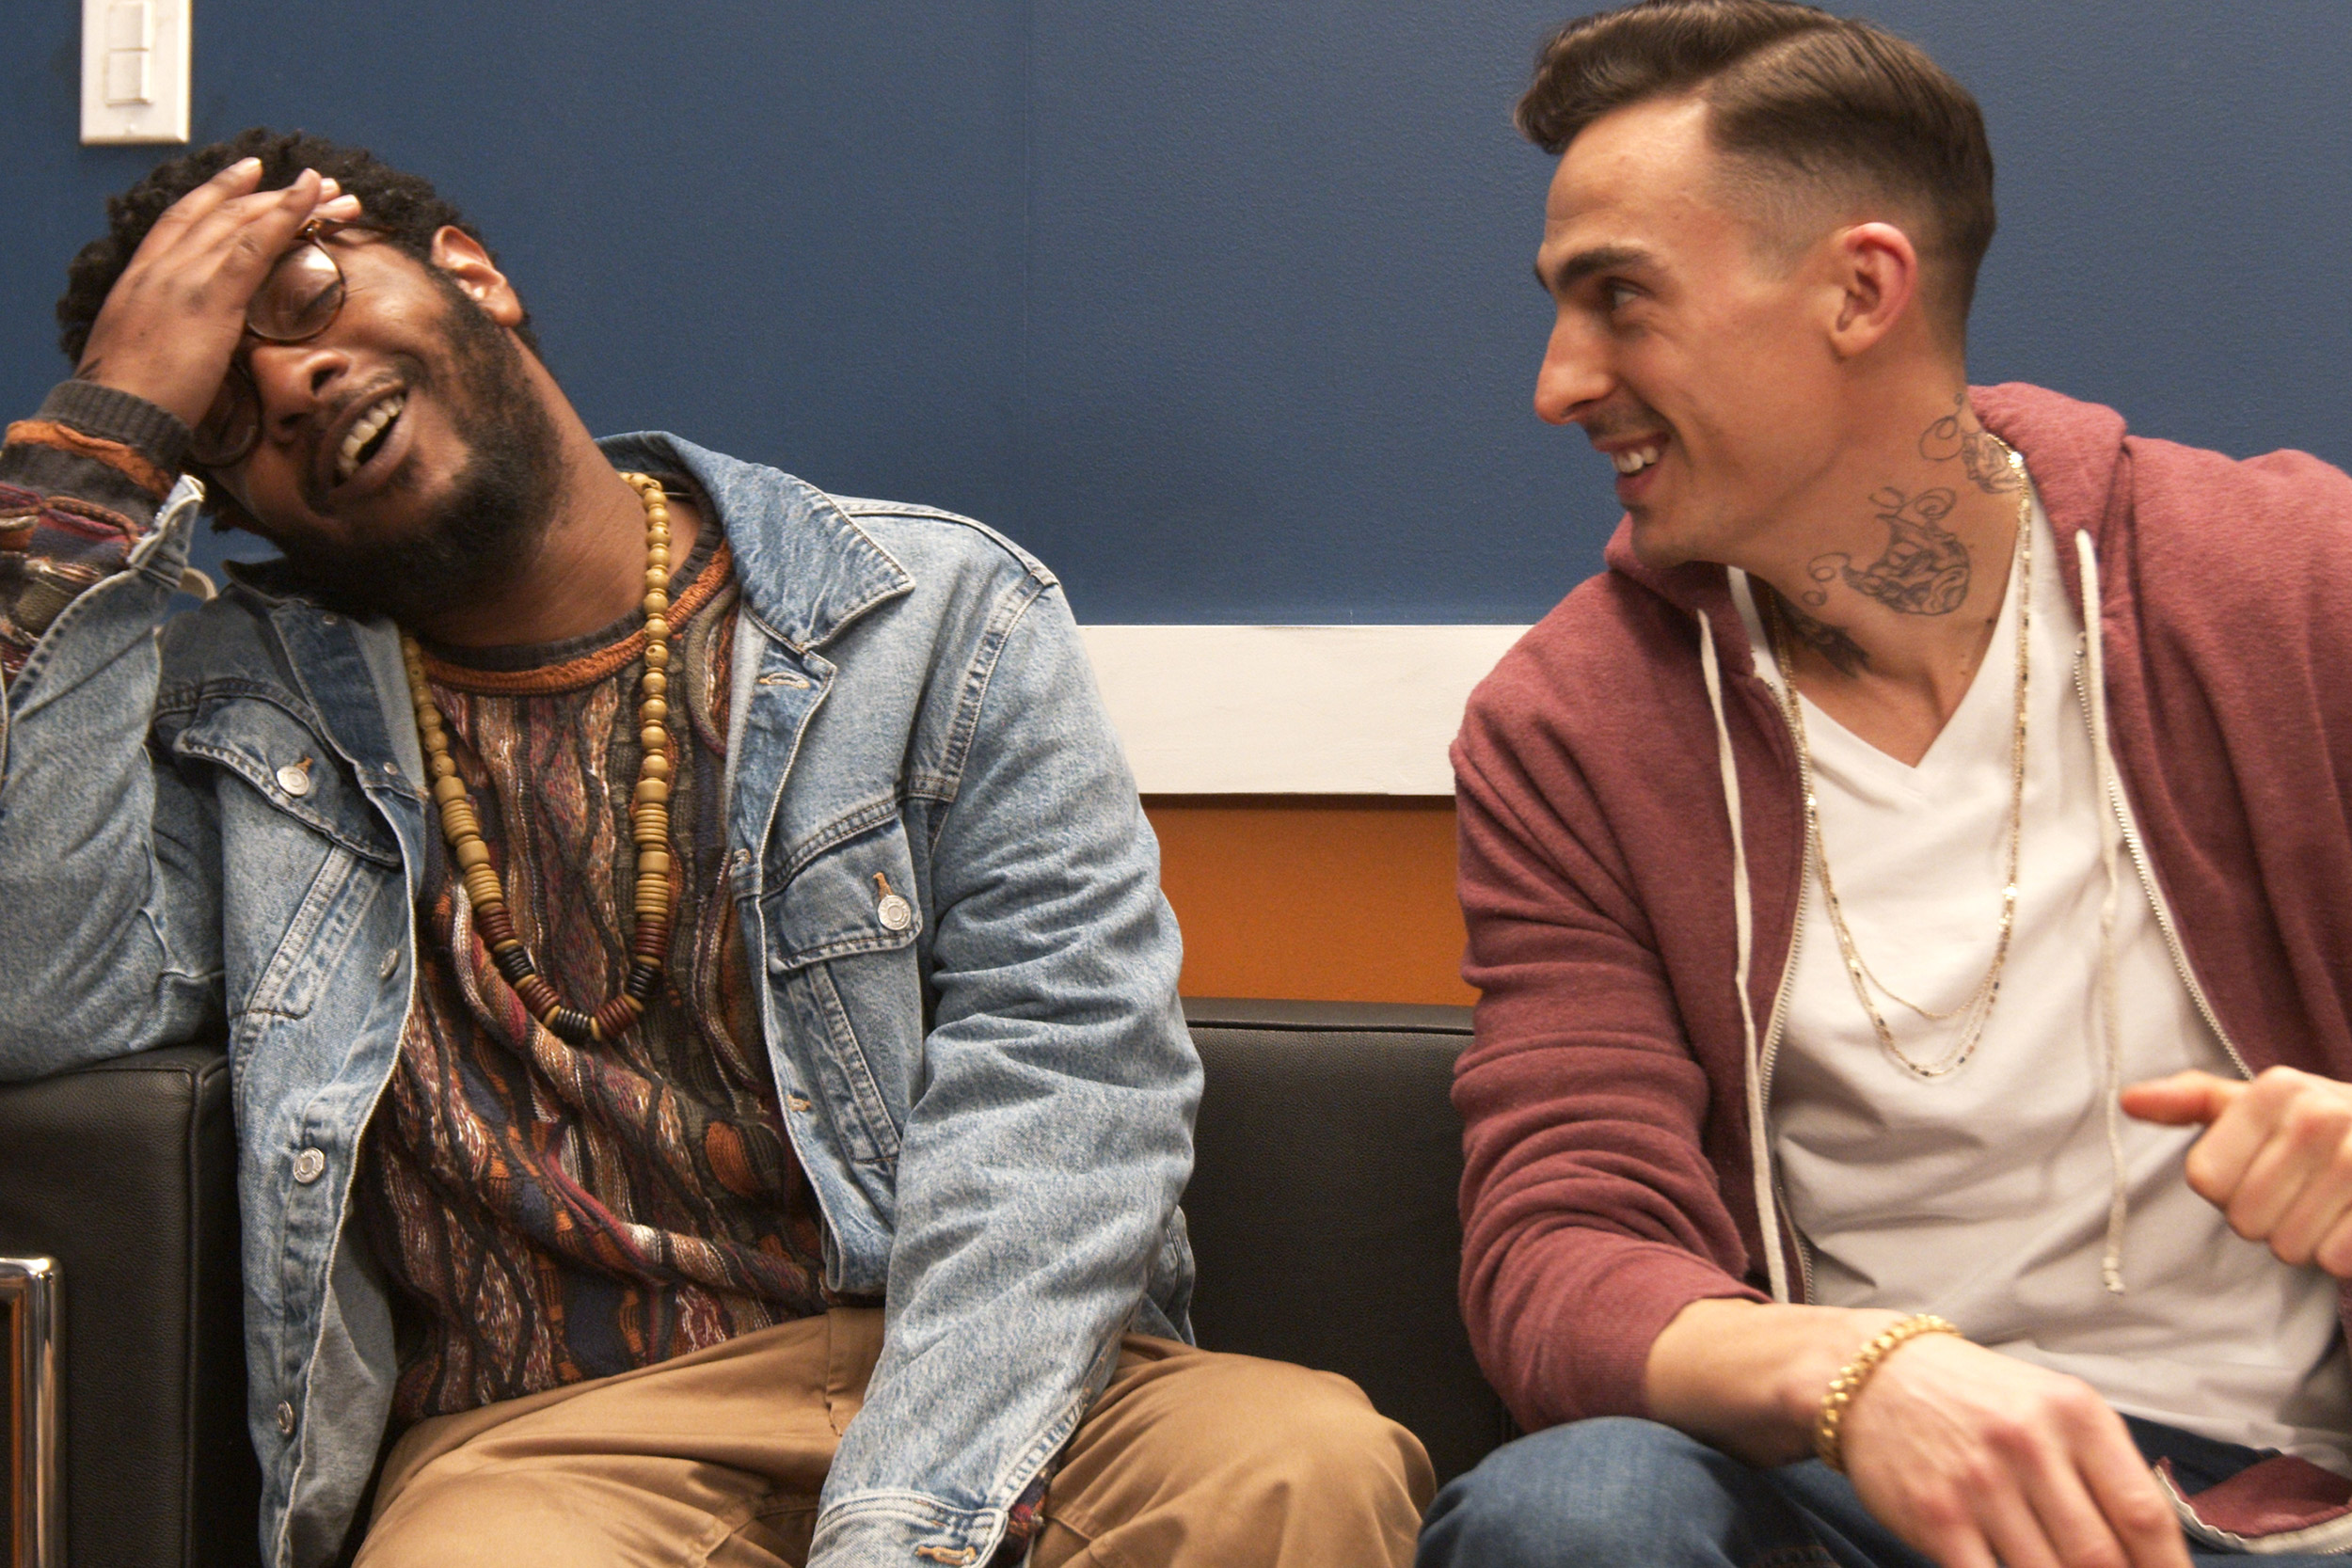 Kadahj Bennett (left) plays Verb, a Black hype man for white rapper Pinnacle, portrayed by Michael Knowlton.